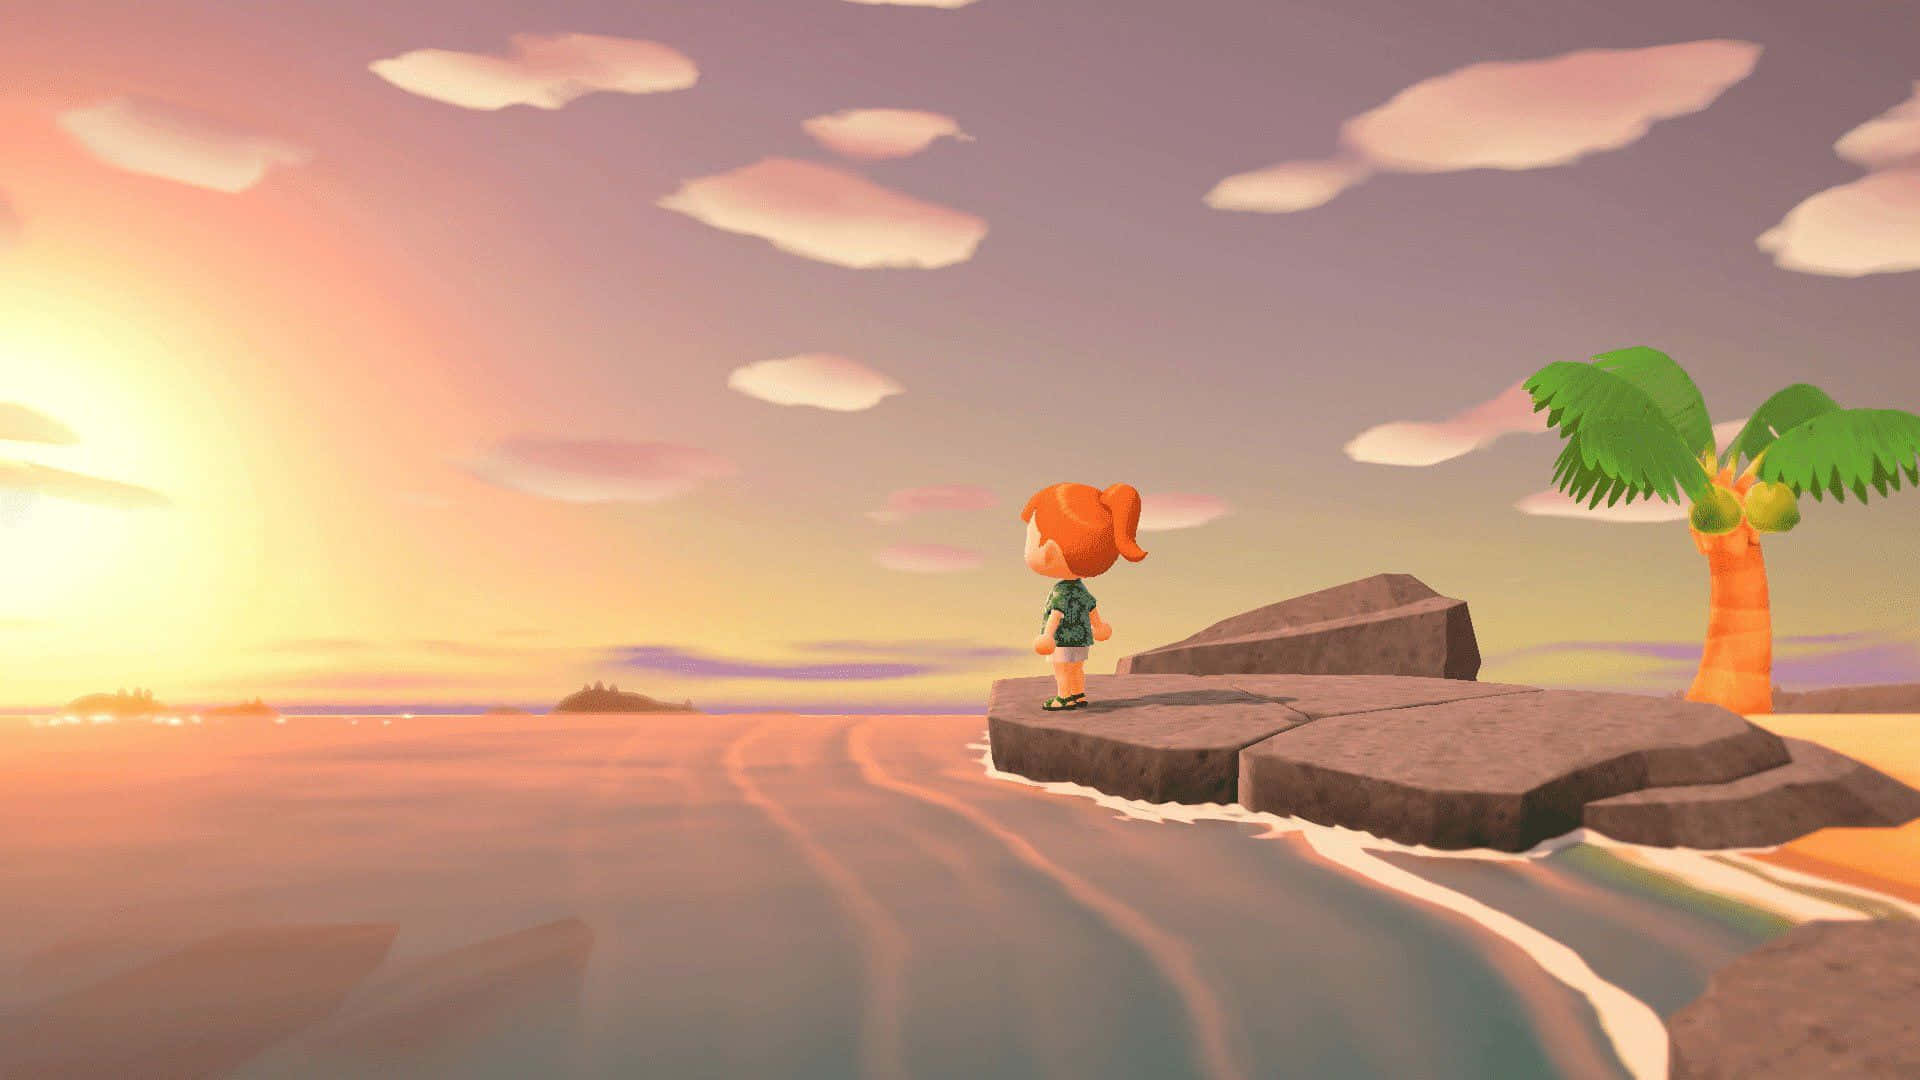 Ready to follow your dreams in Animal Crossing?